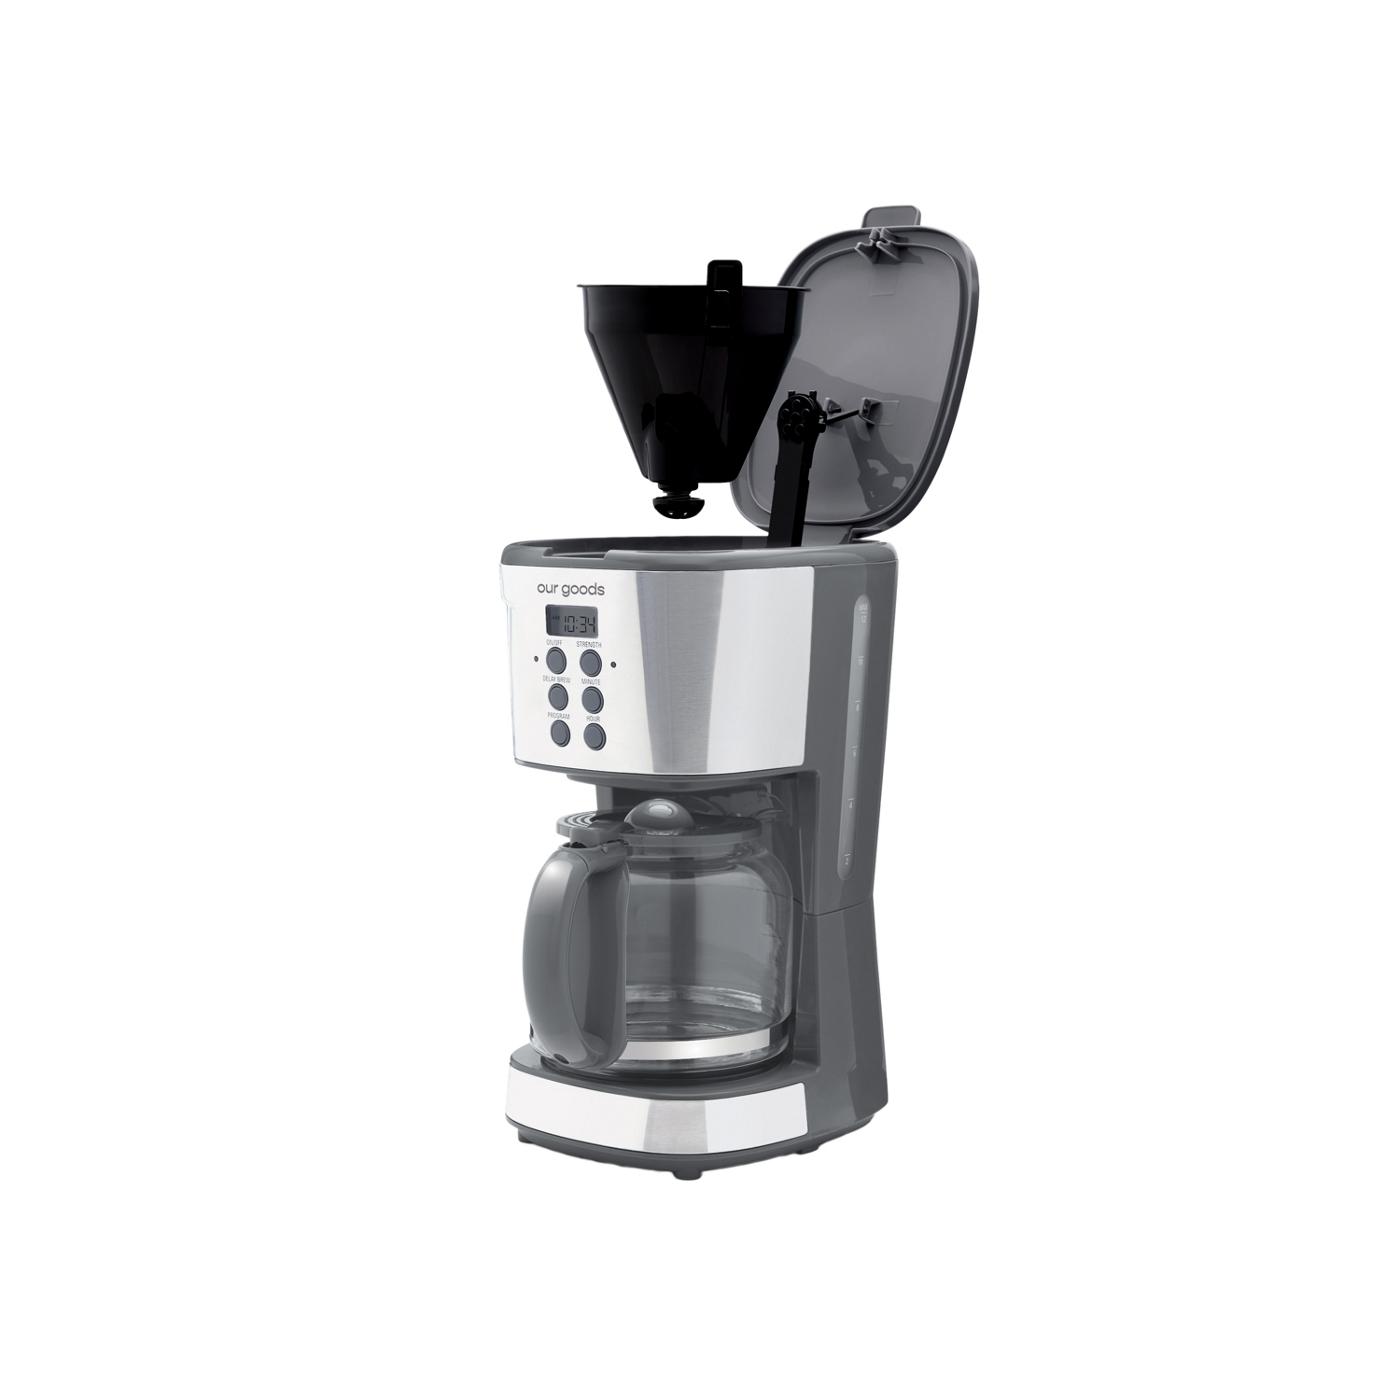 our goods Programmable Coffee Maker - Pebble Gray; image 3 of 5